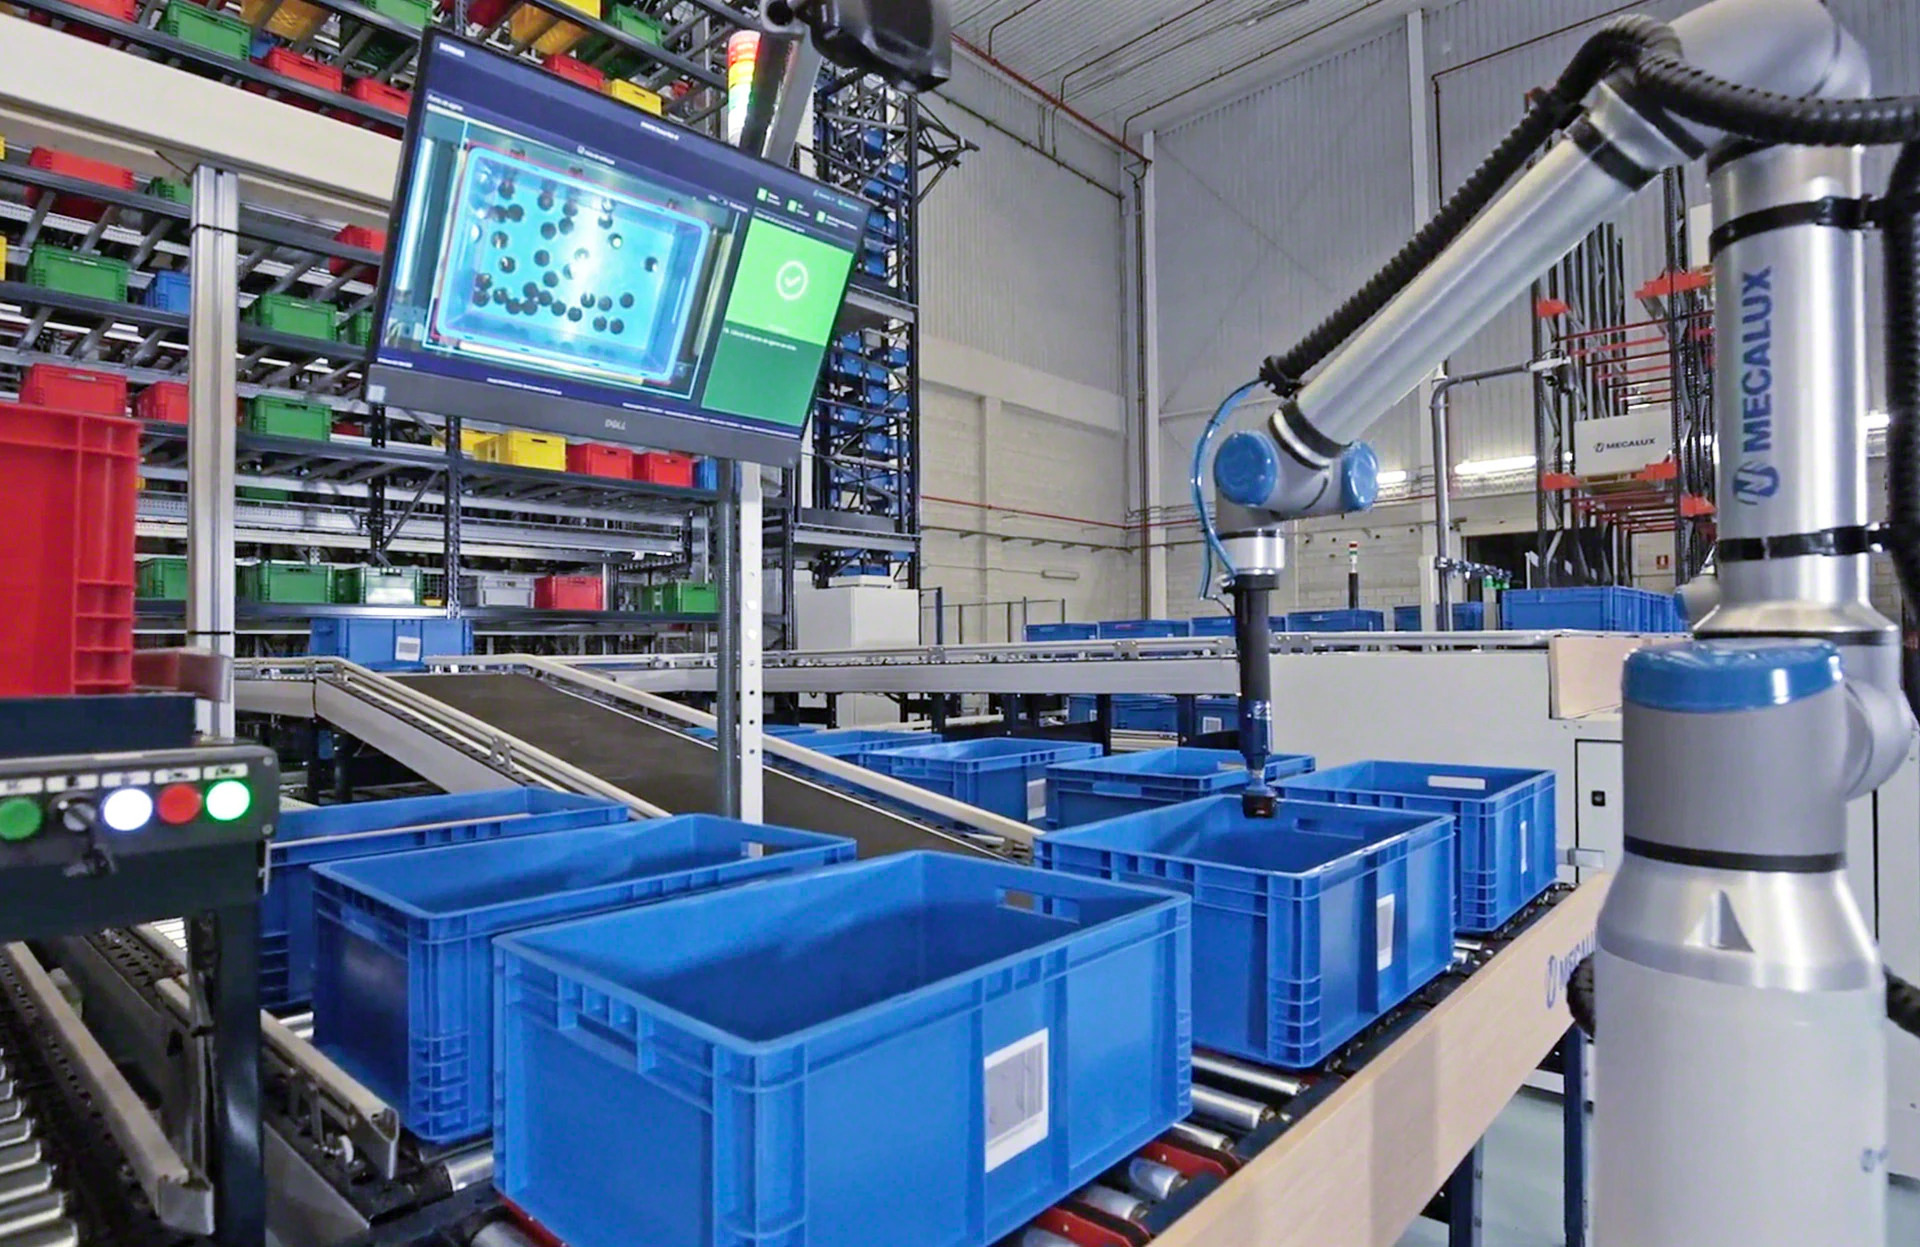 Mecalux’s collaborative picking solution utilizes Siemens’ Simatic Robot Pick AI technology for improved order processing